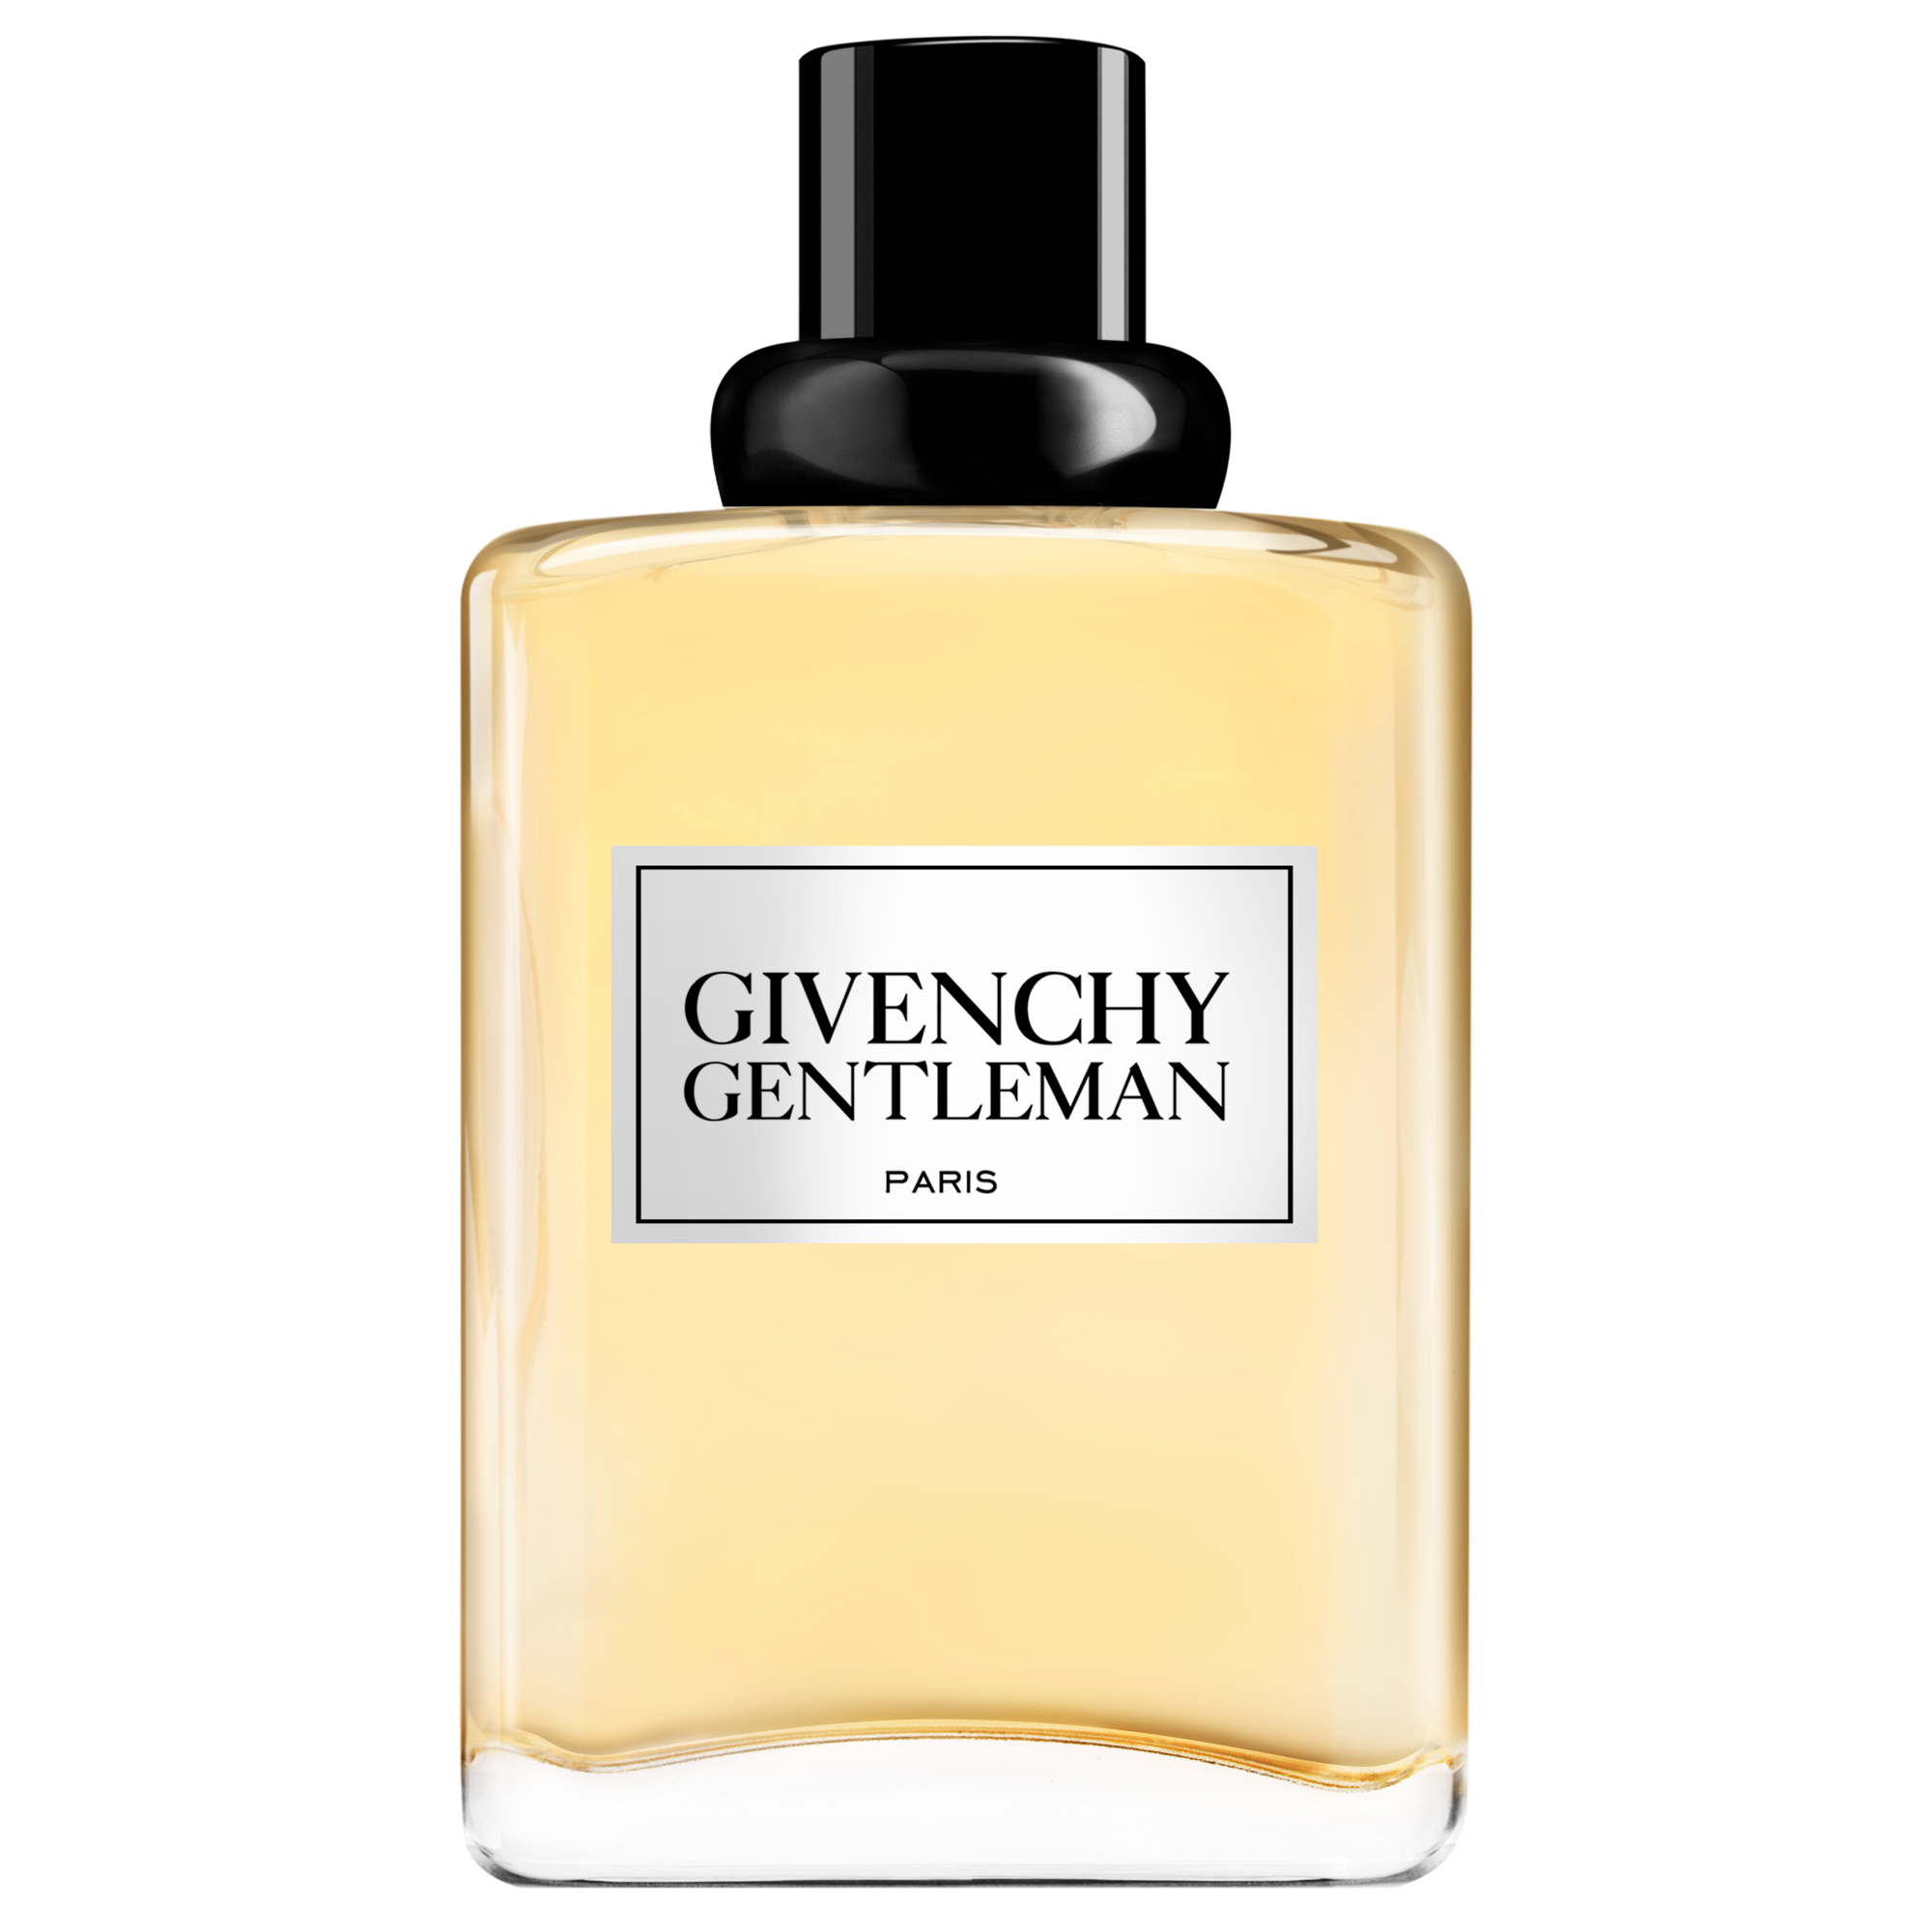 the gentleman givenchy